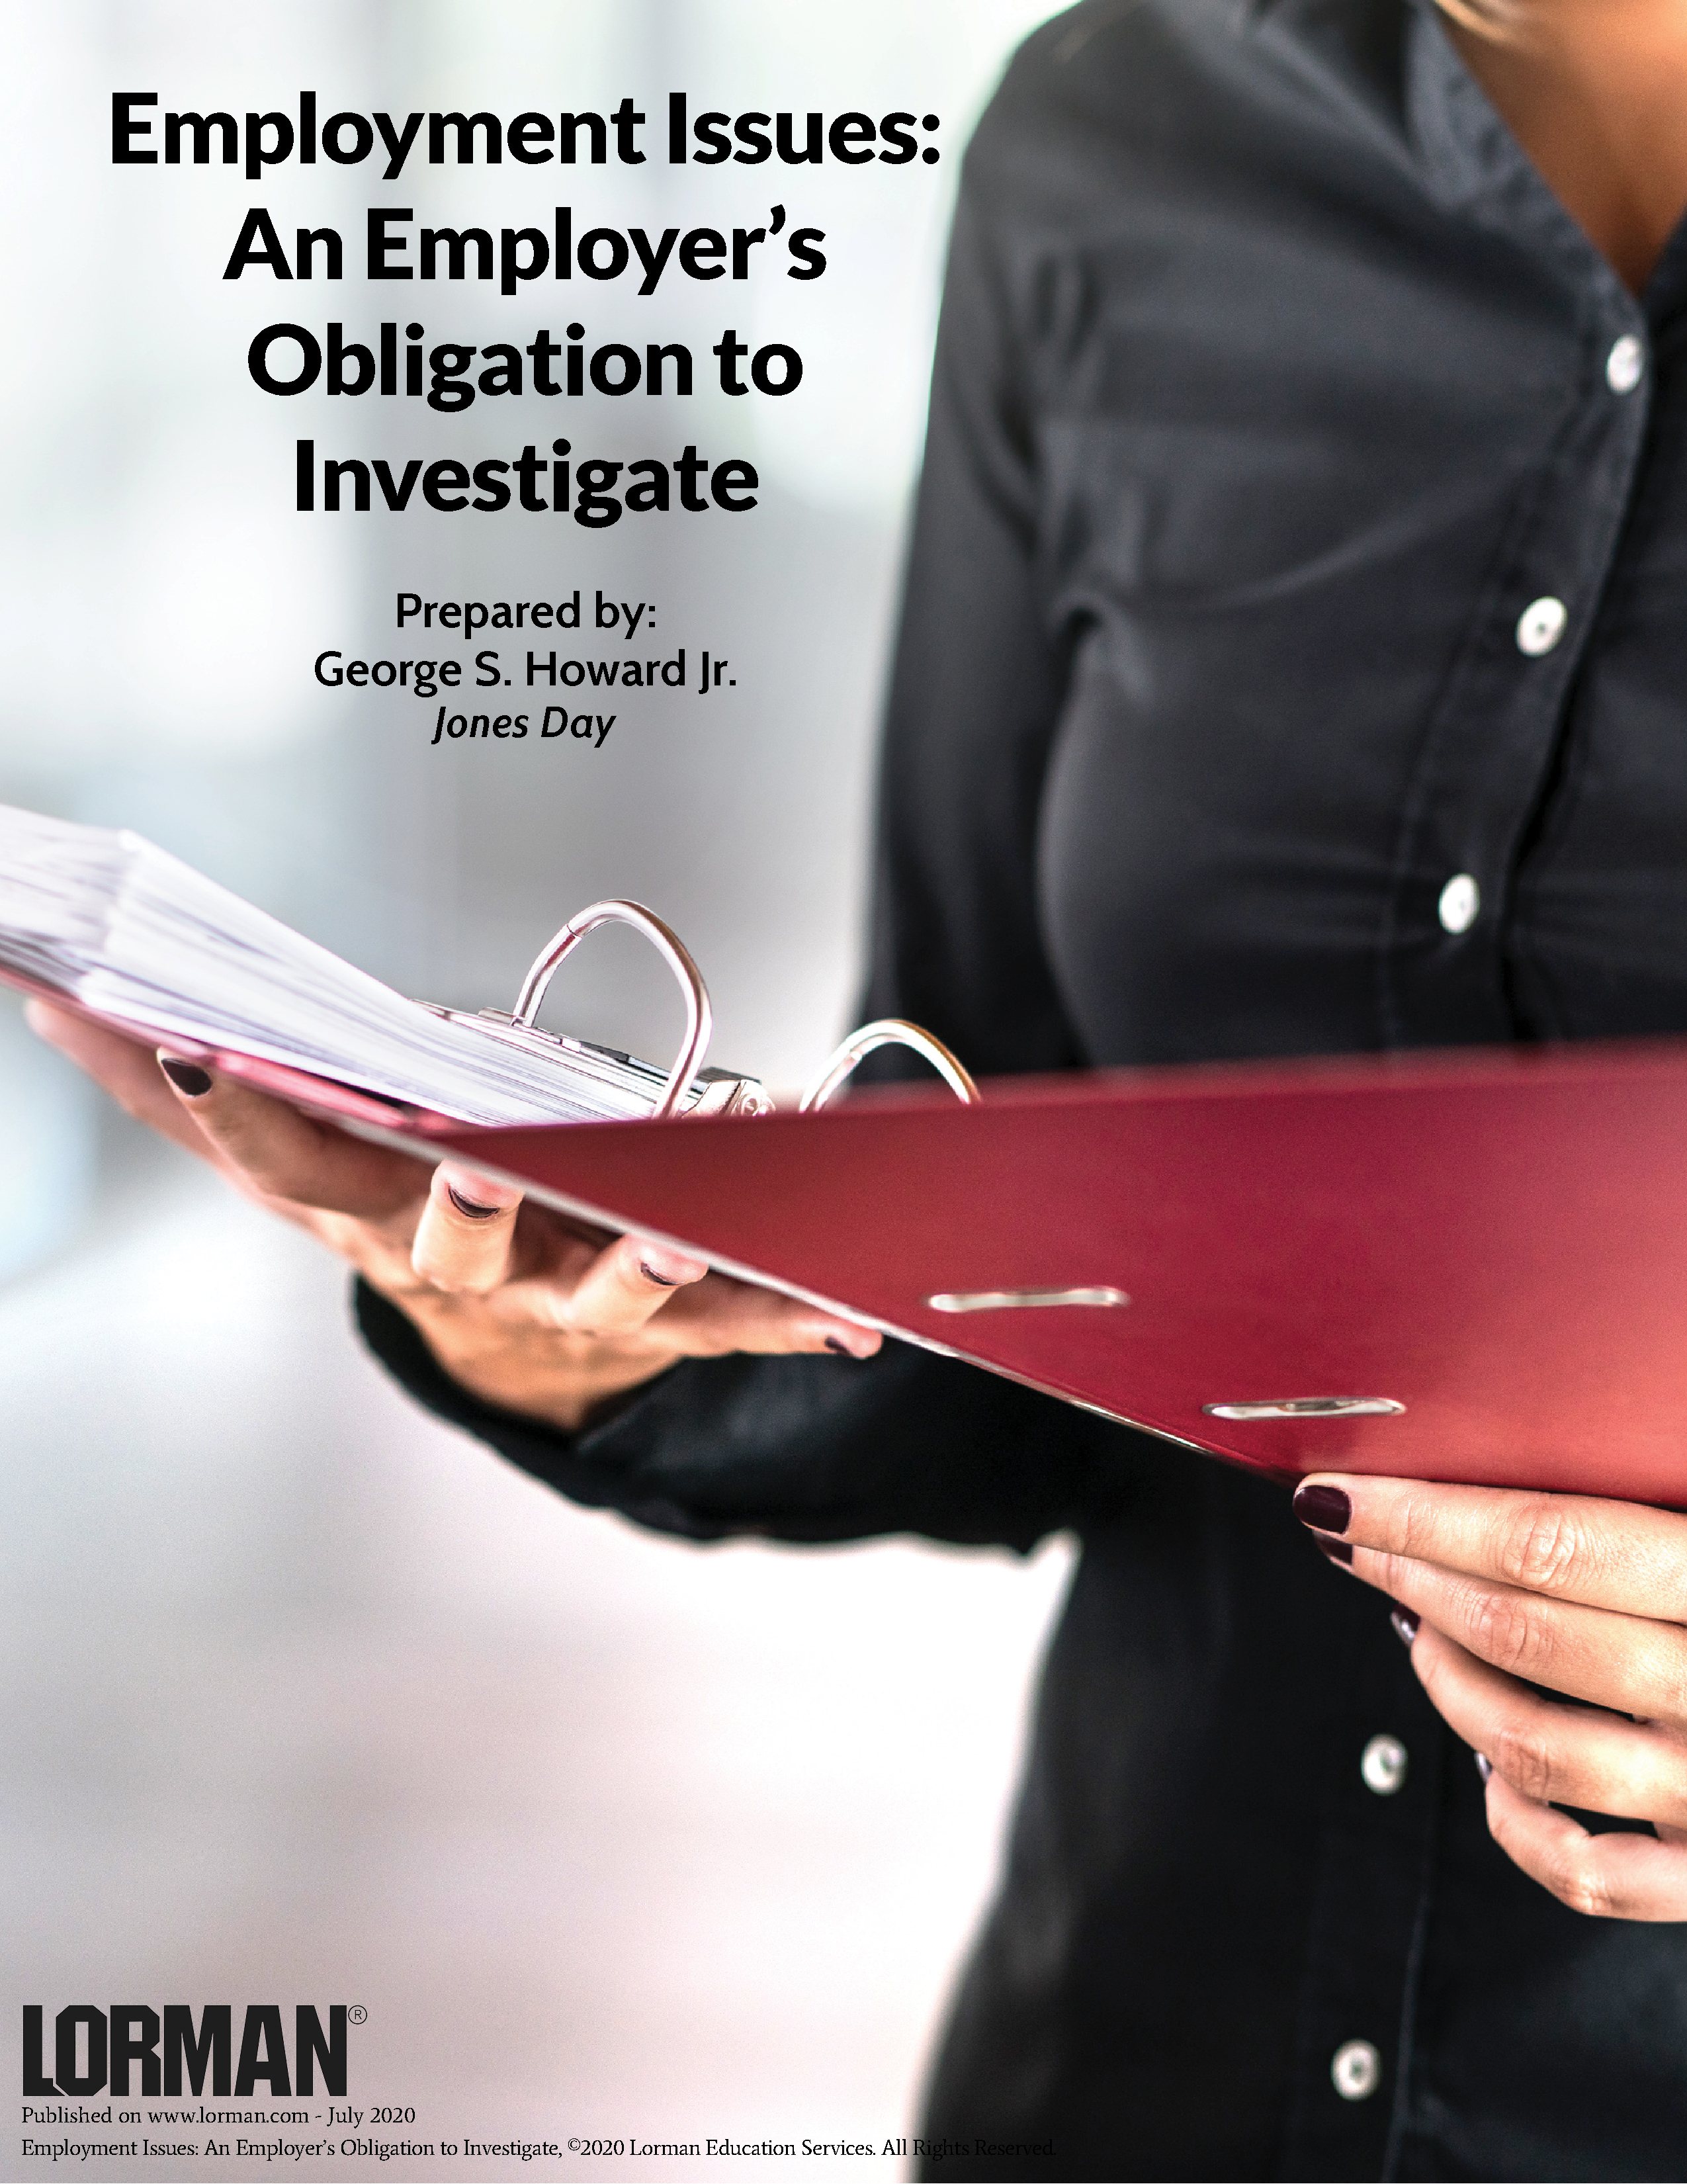 Employment Issues: An Employer’s Obligation to Investigate